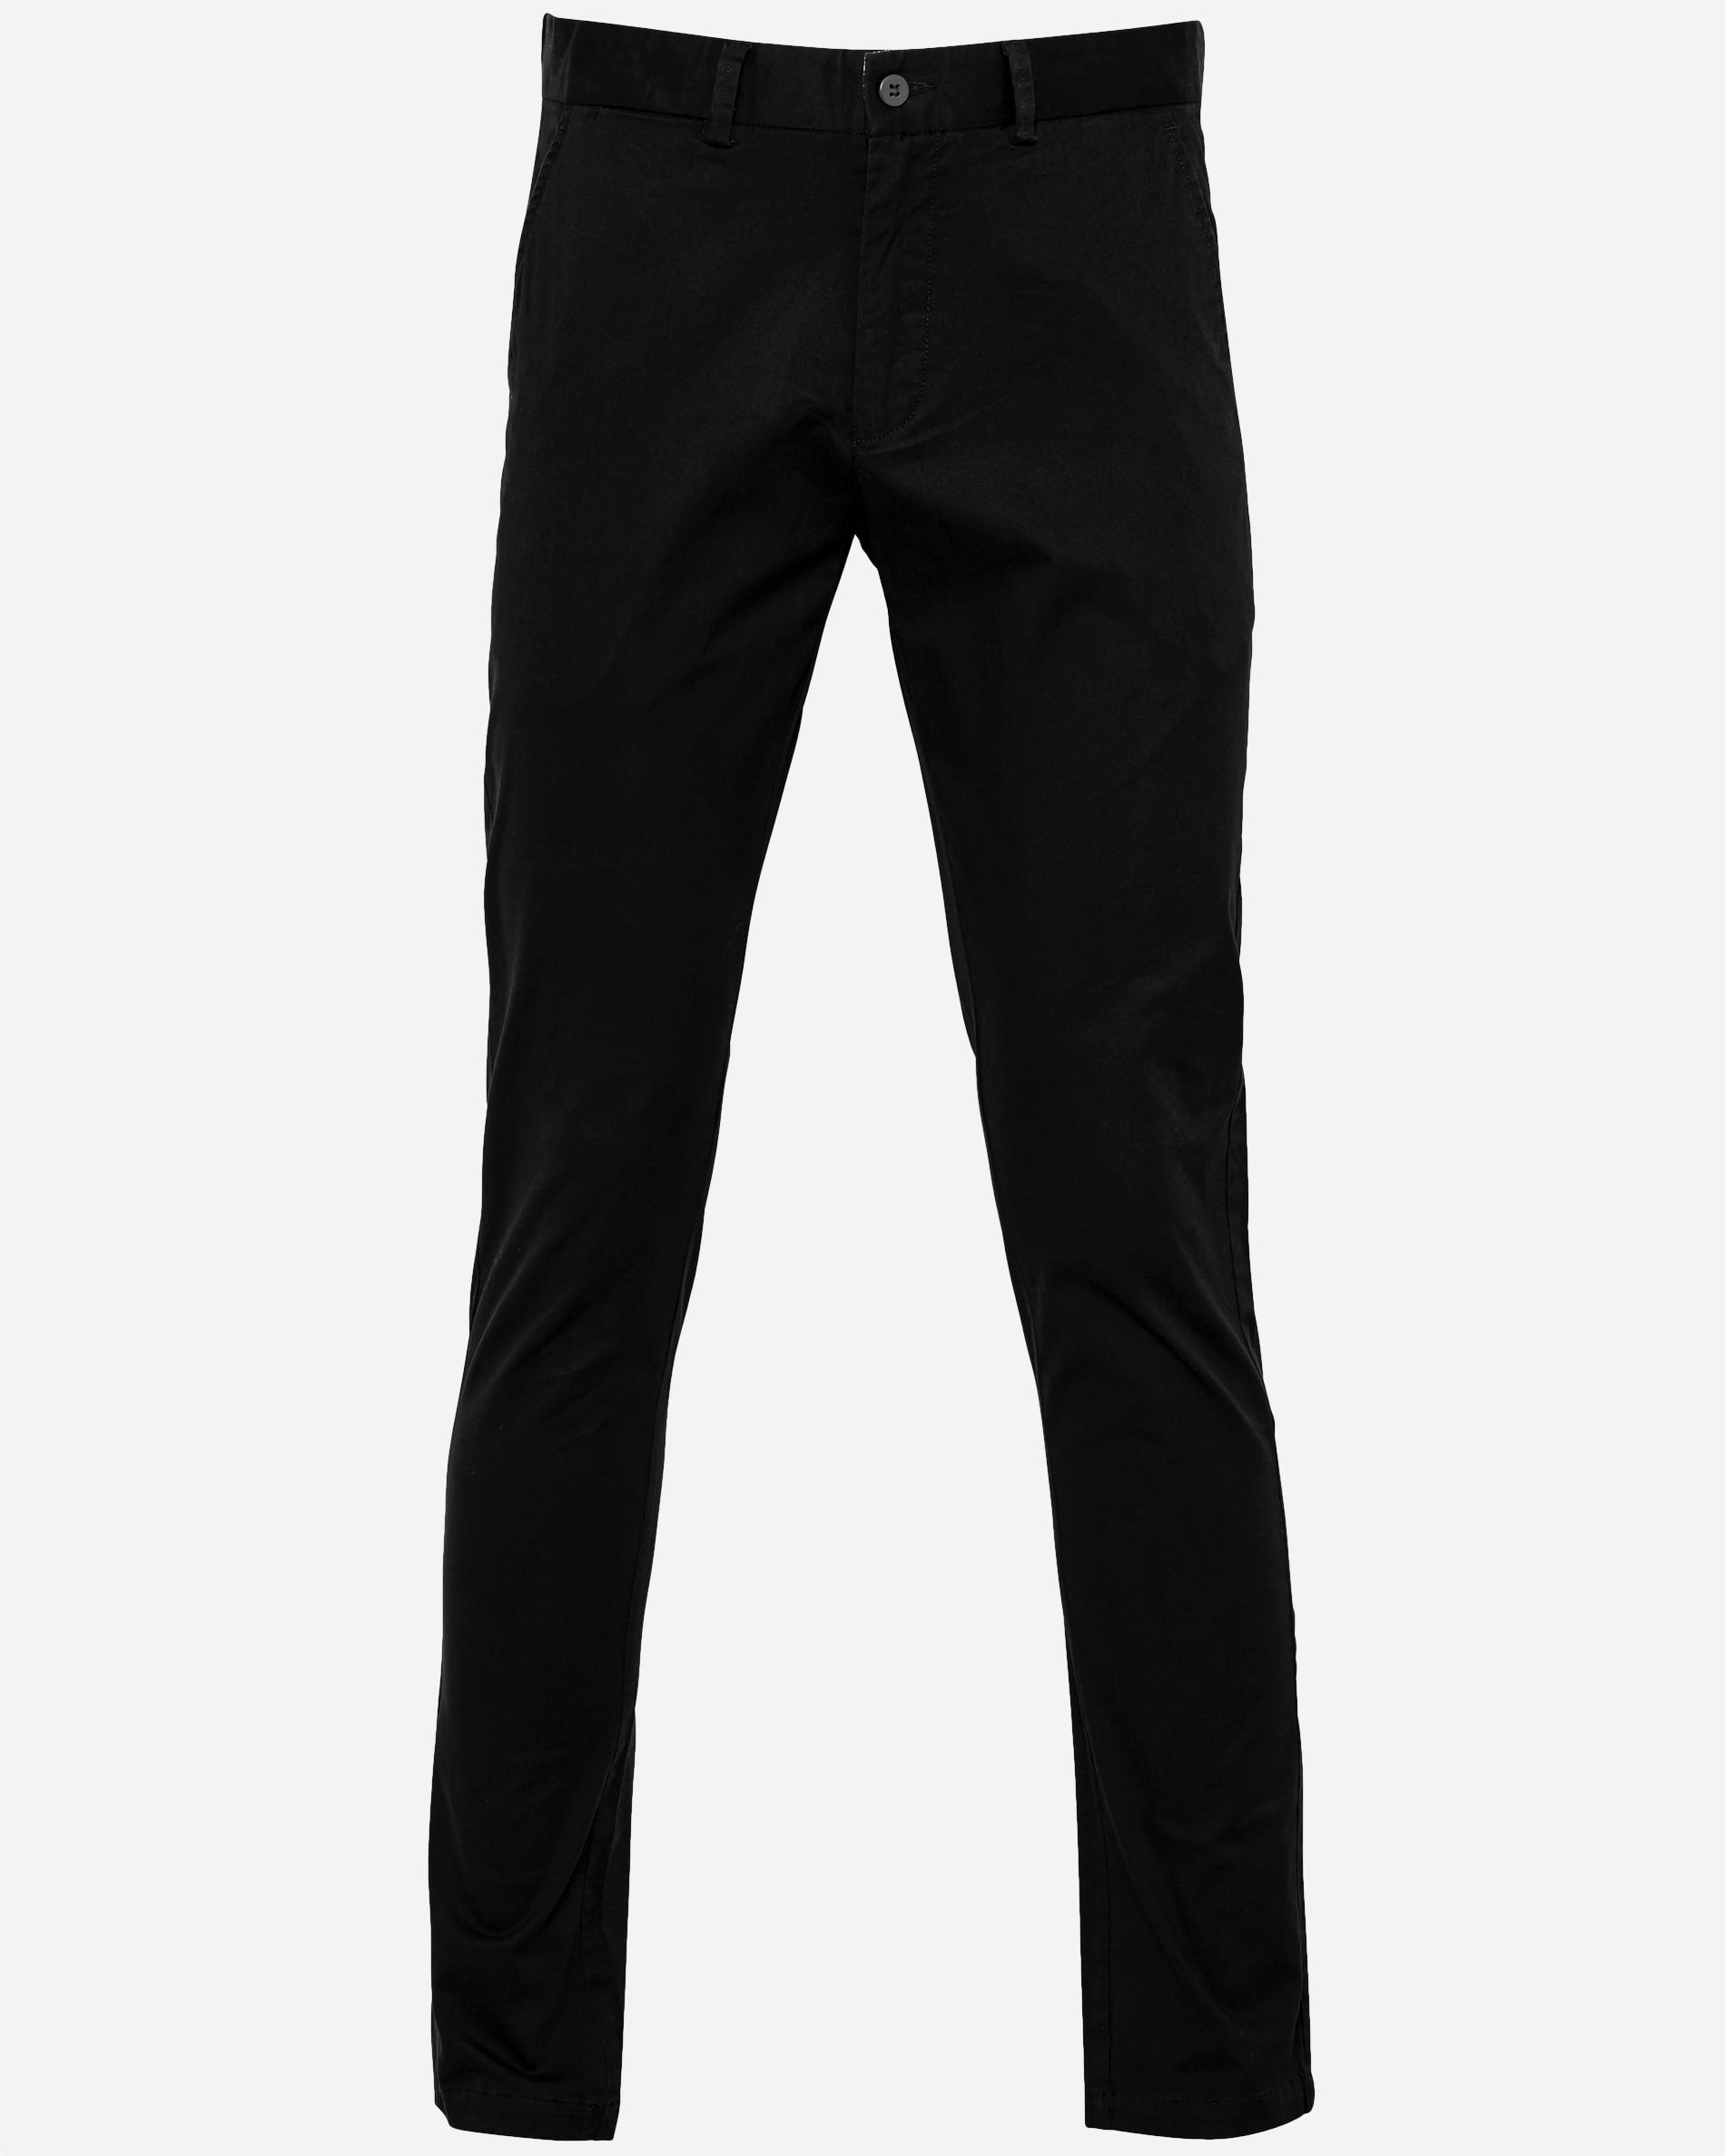 Asquith Chino - Men's Pants at Menzclub